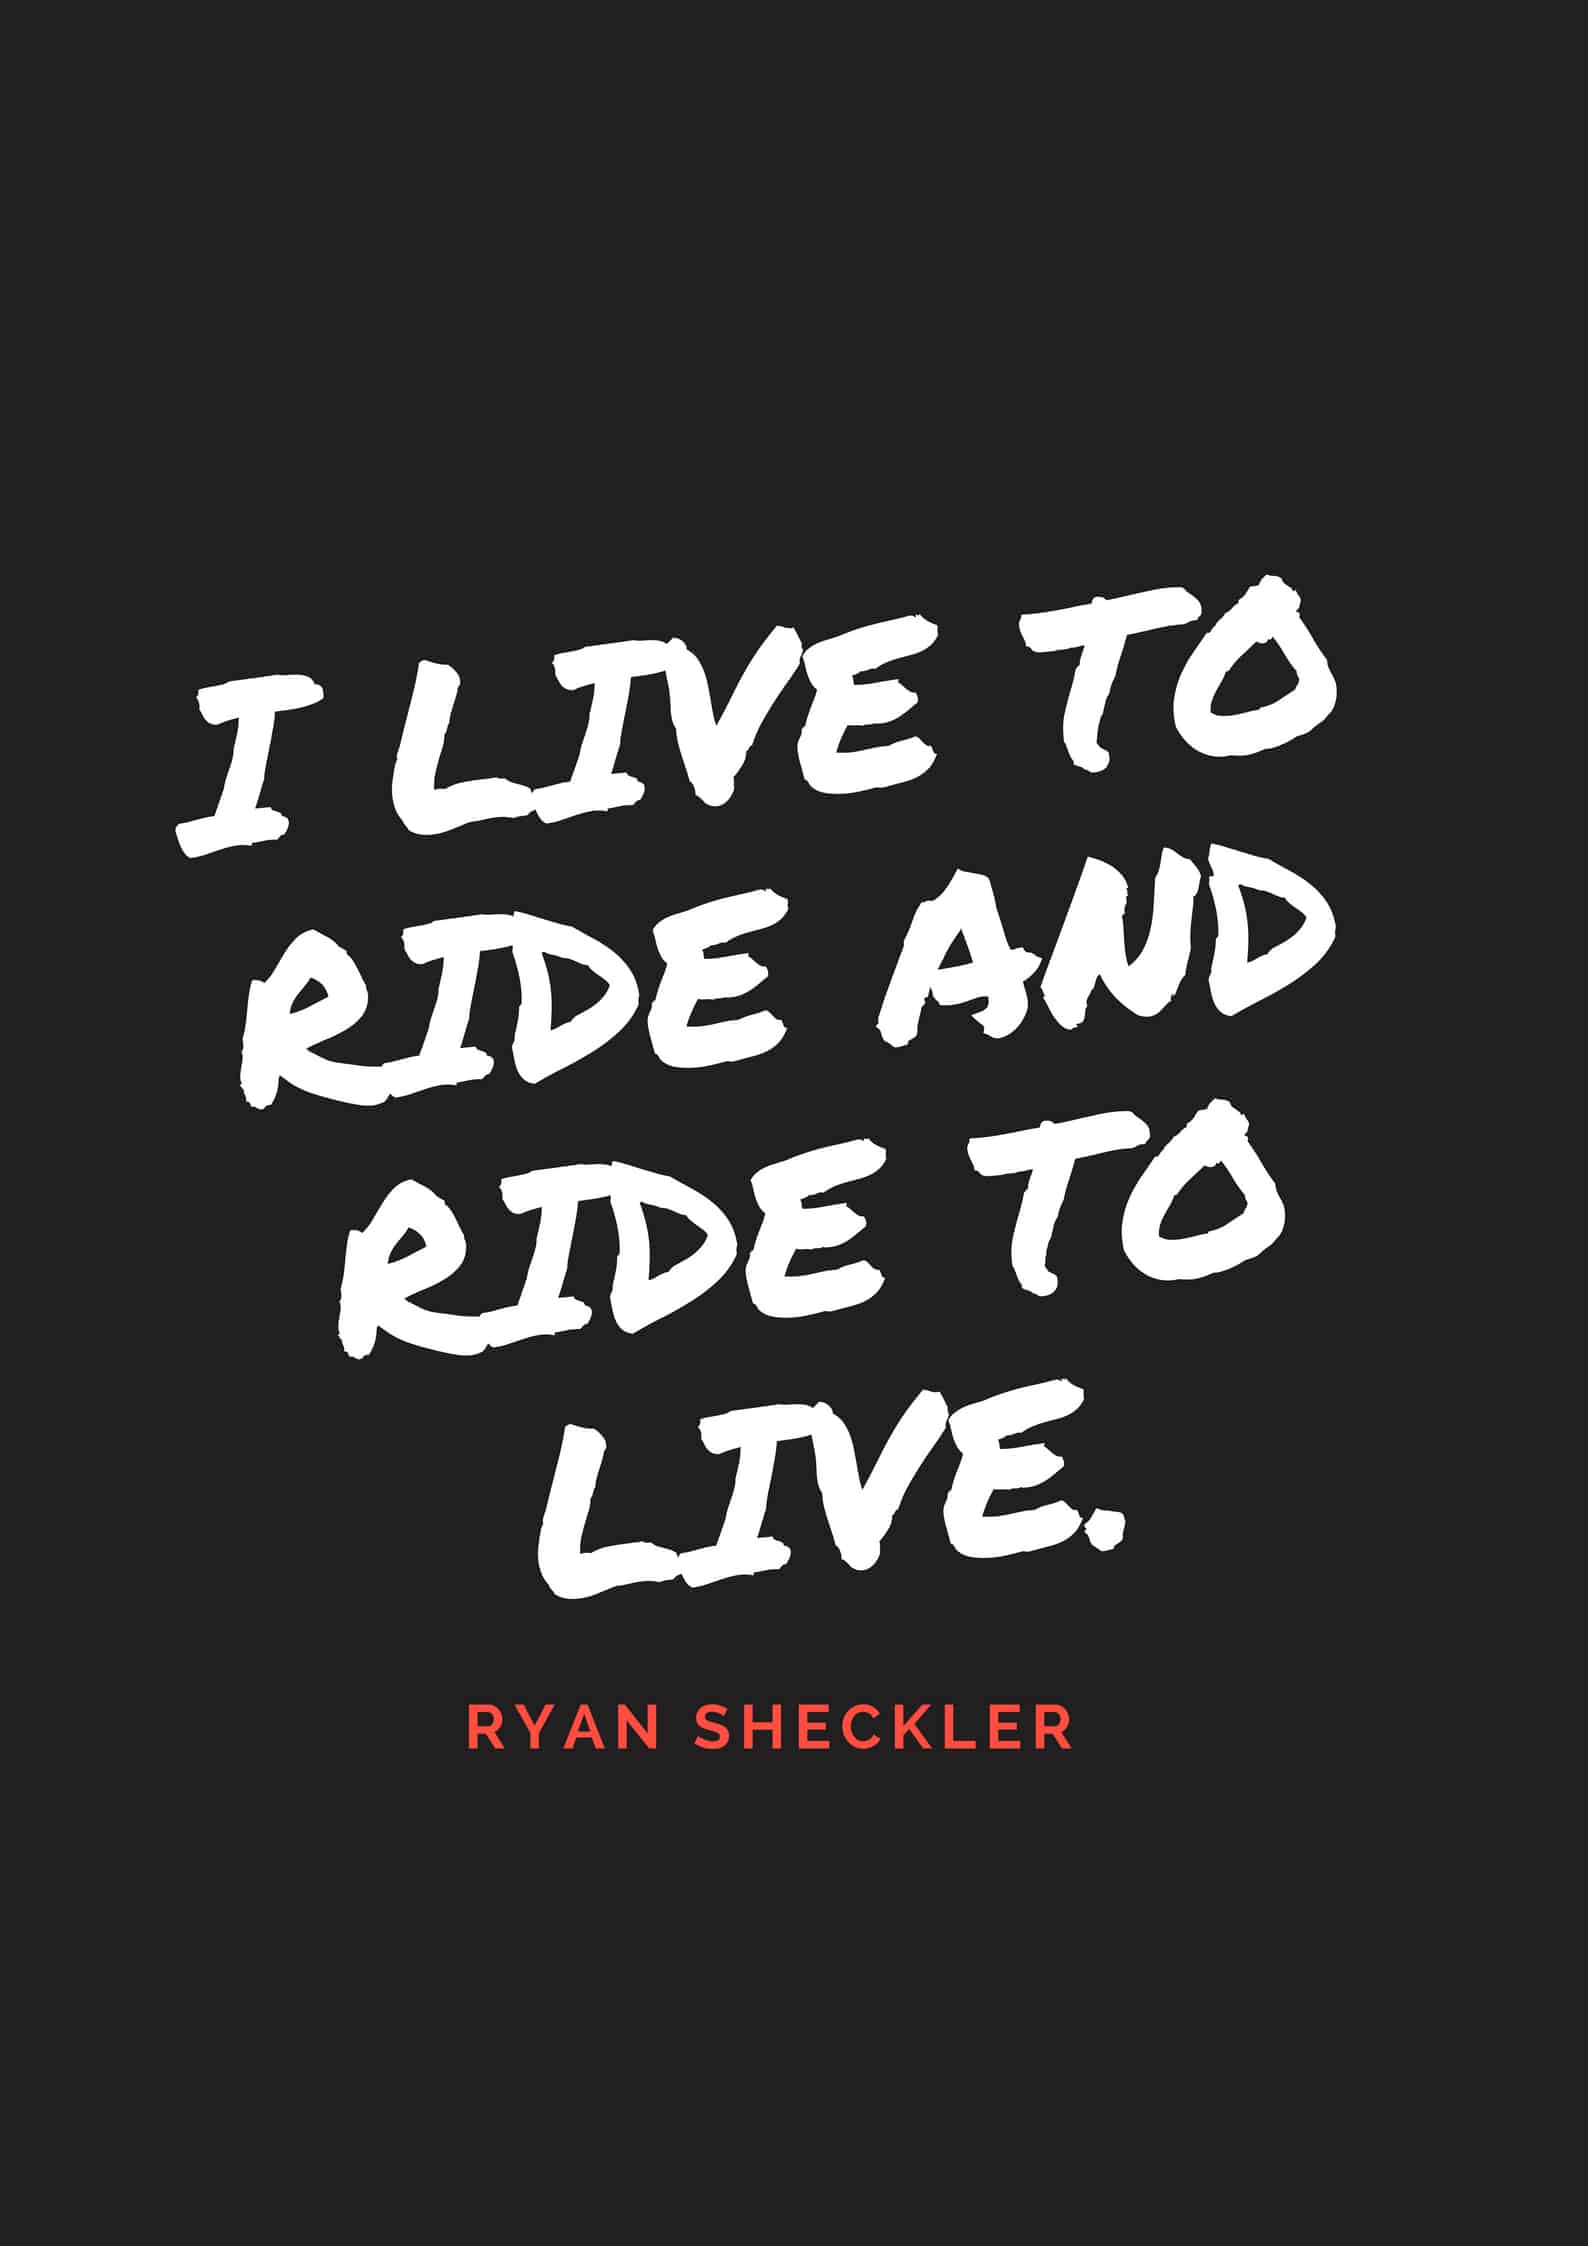 I live to ride and ride to live.